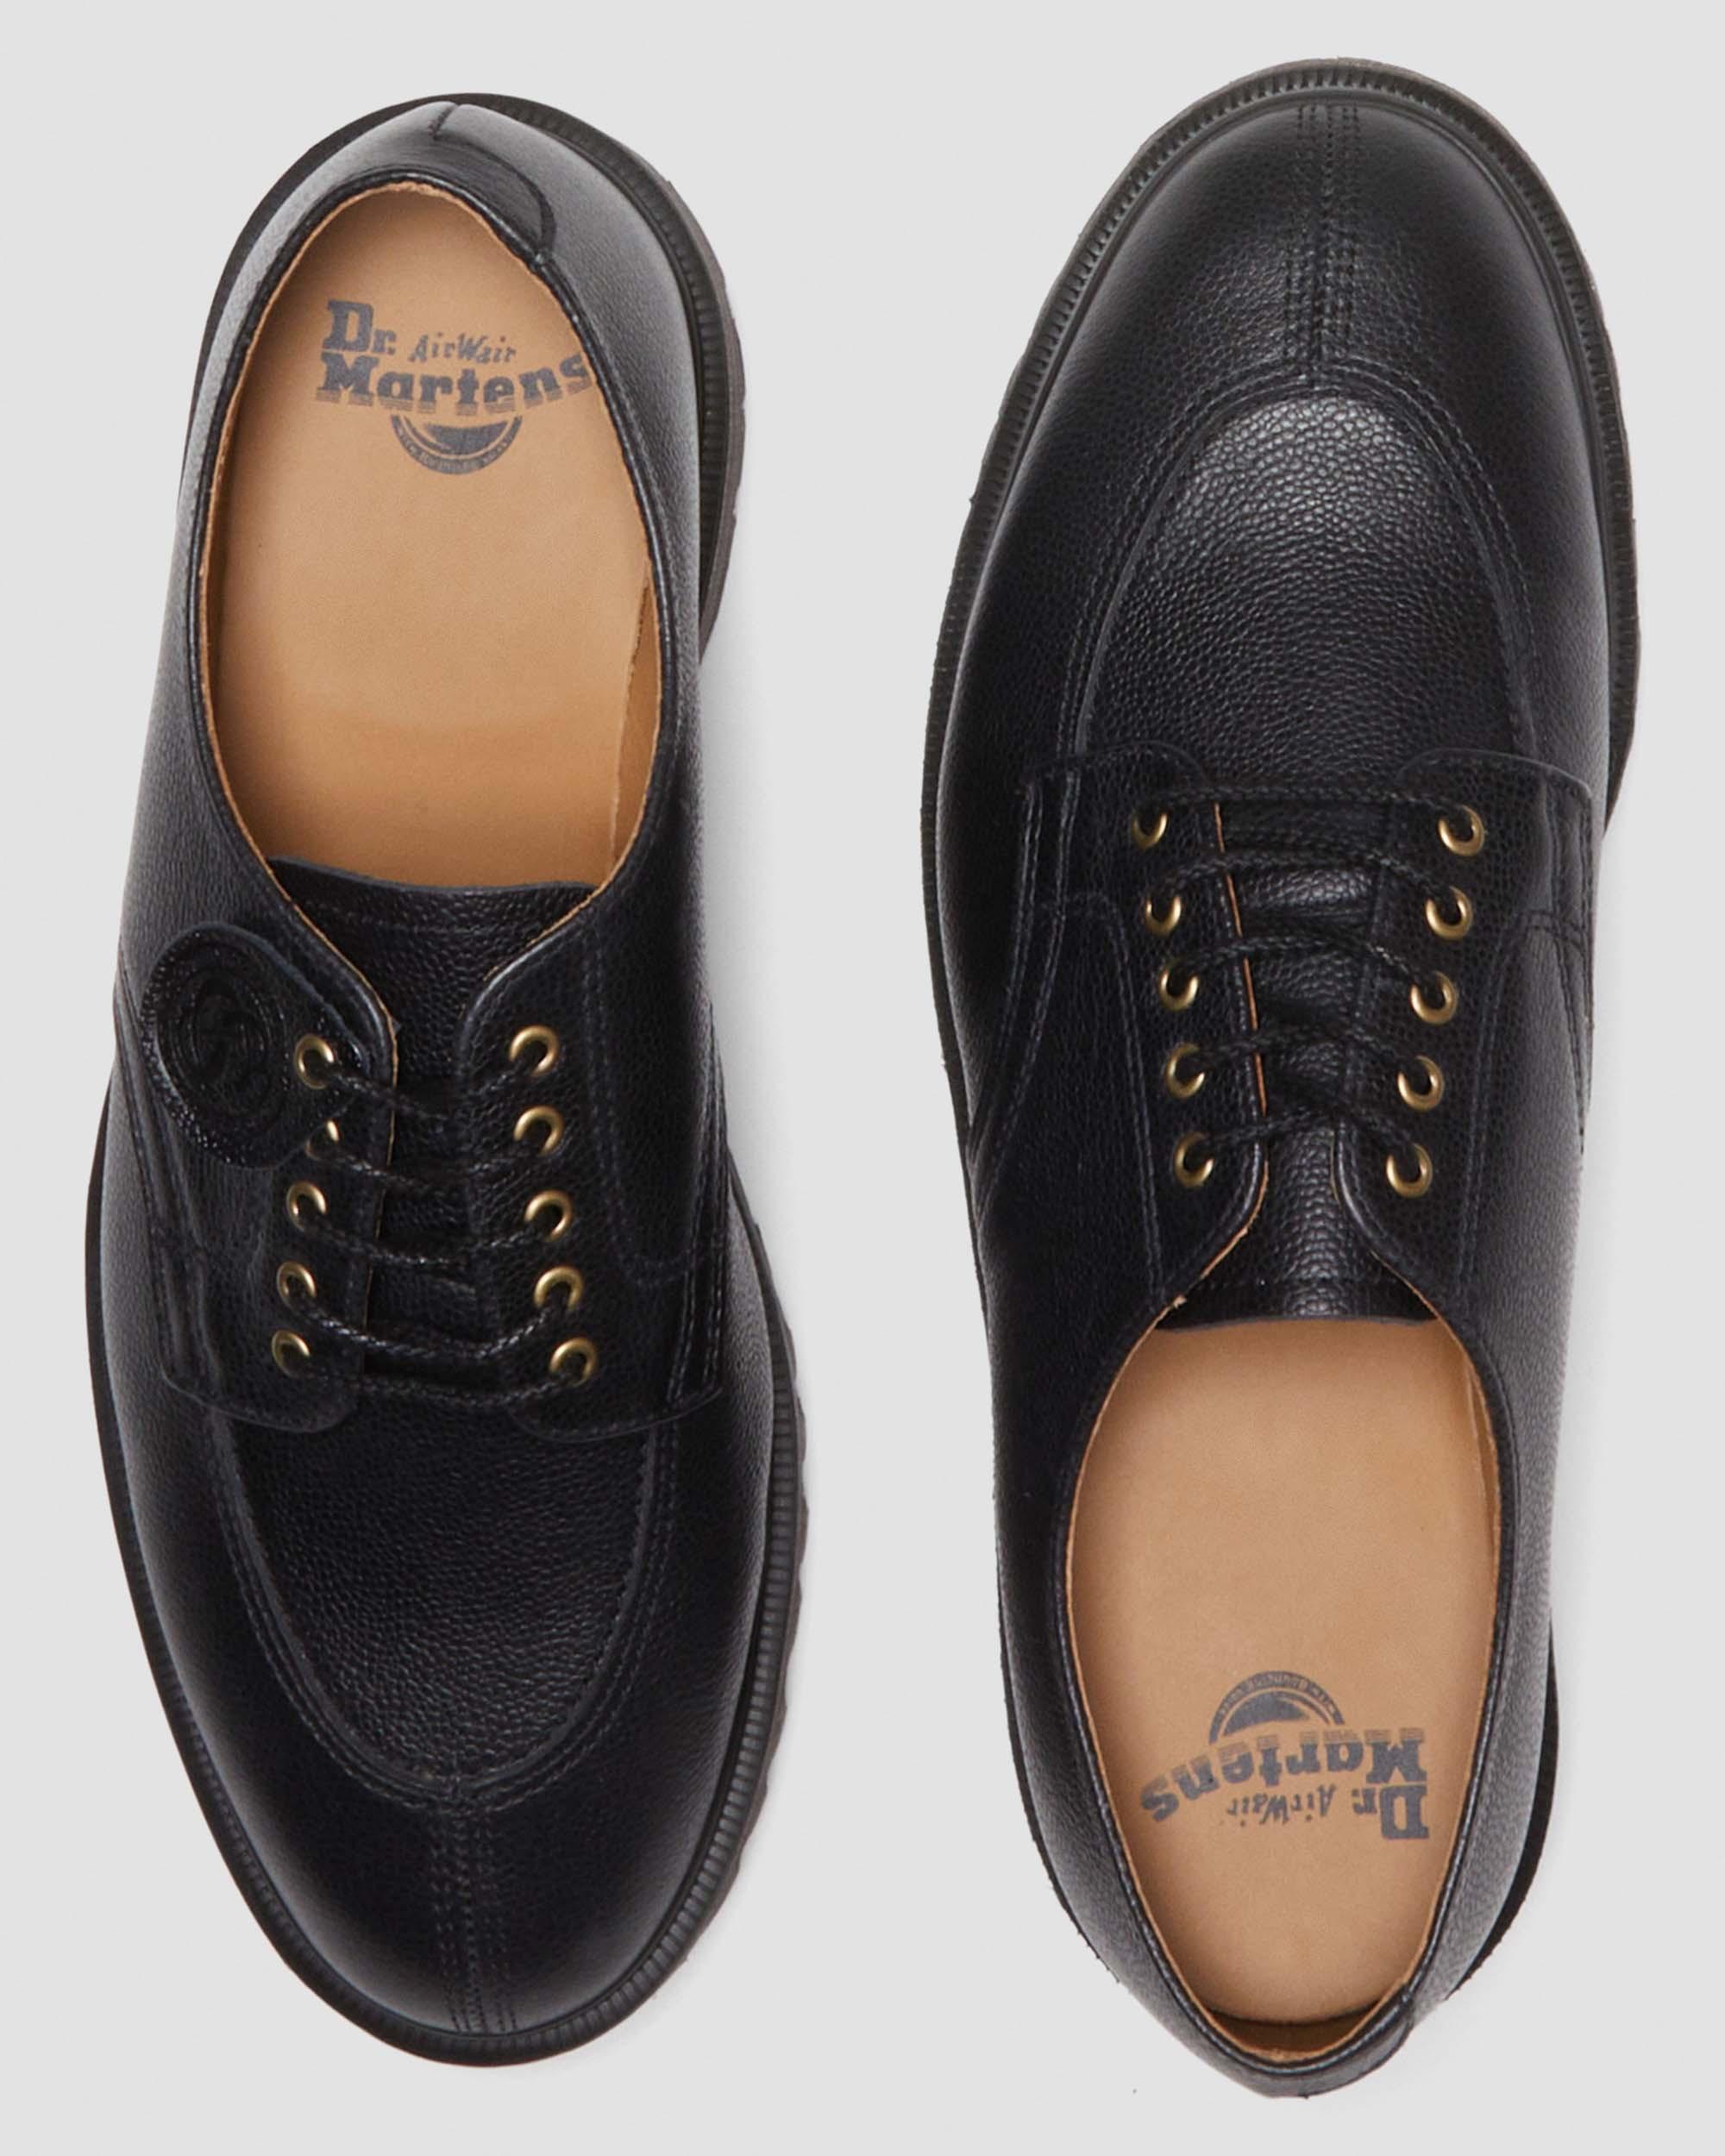 DR MARTENS 2046 Westminster Leather Lace Up Shoes